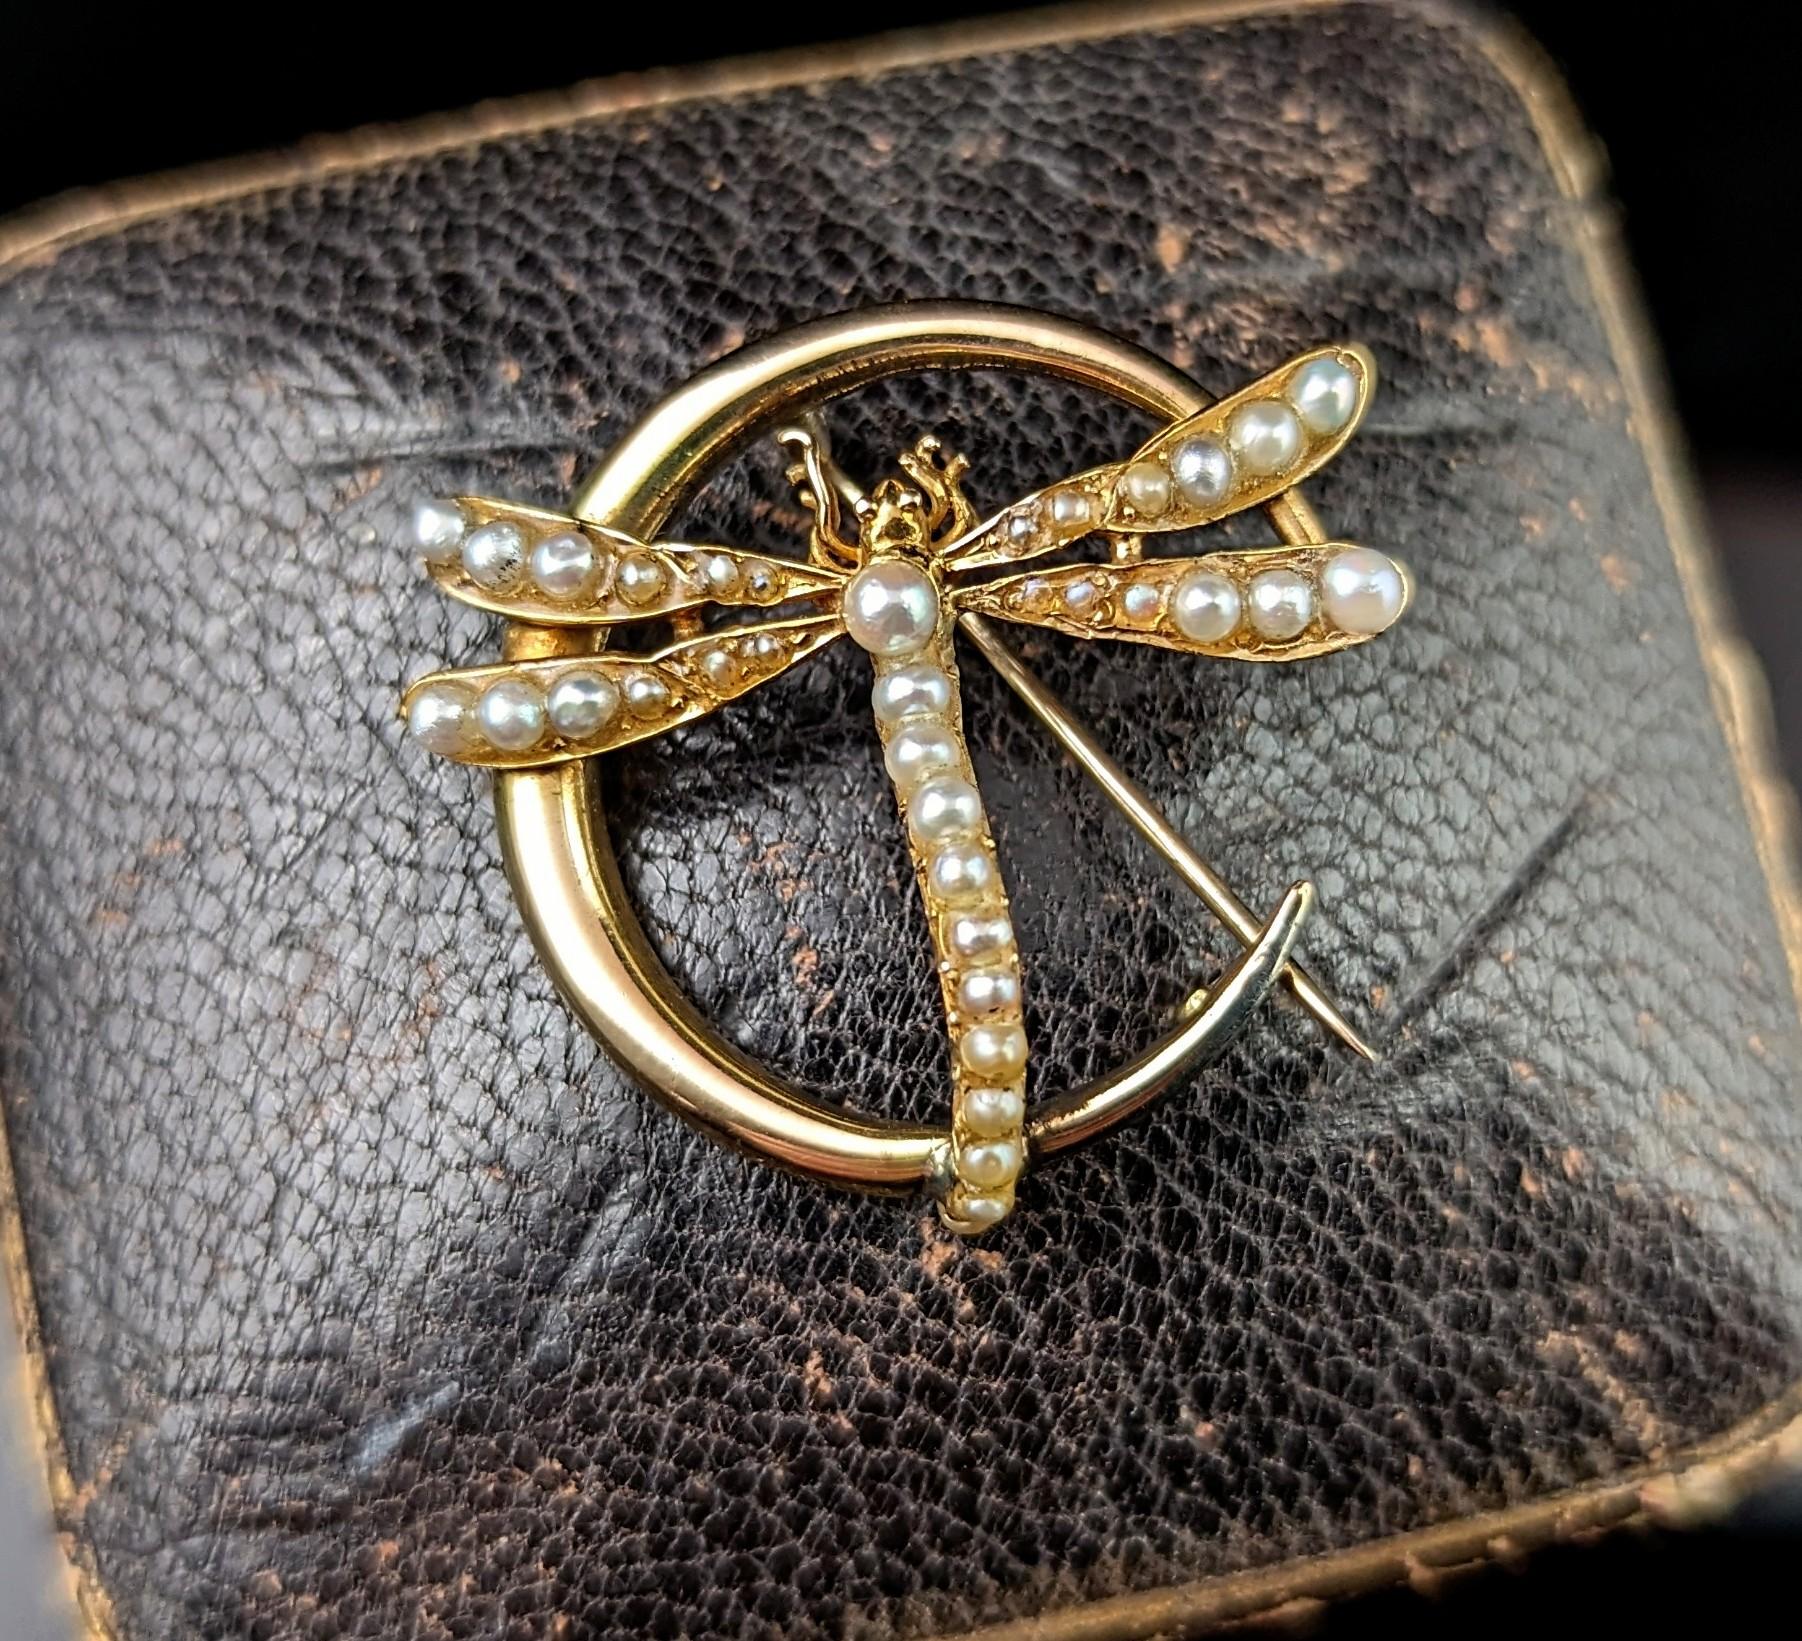 A gorgeous antique, late Victorian, 9ct gold and pearl crescent and Dragonfly brooch.

A beautiful closed crescent in rich 9ct yellow gold with a wonderful pearl set dragonfly sat across the moon.

This is really a piece packed with symbolism with